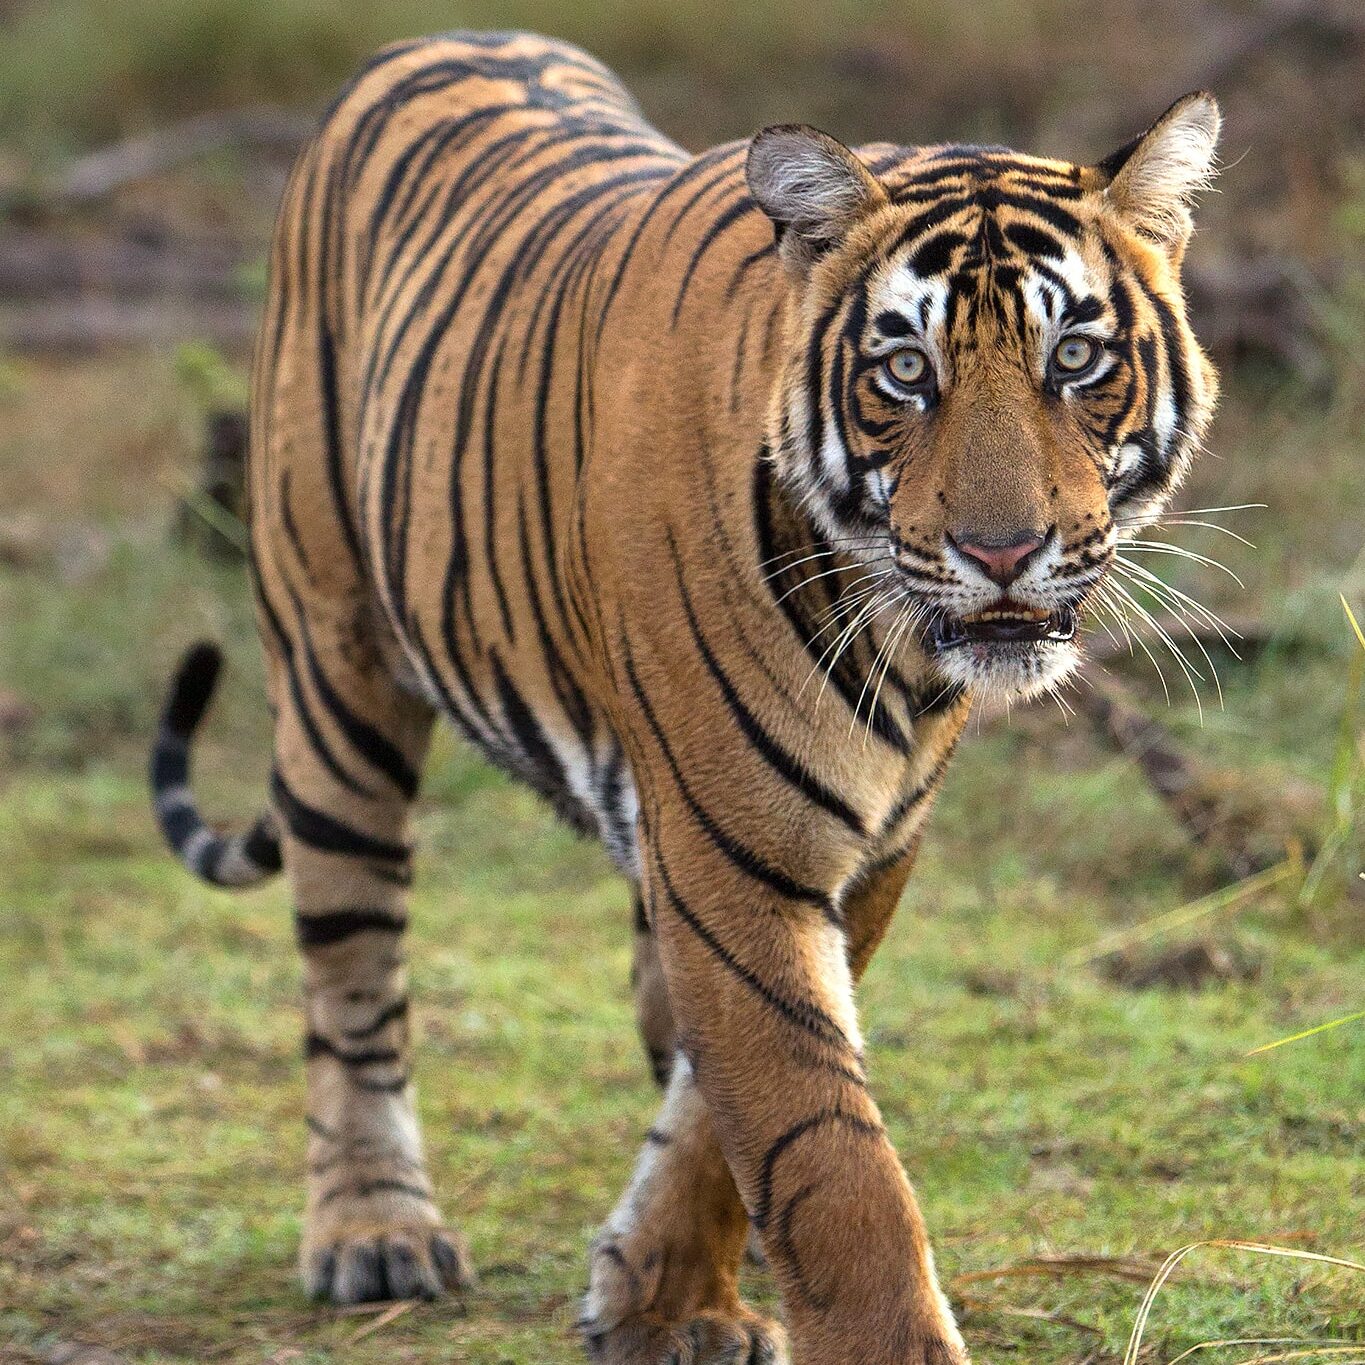 Tiger in Ranthambore on a Wildlife Photography Tour